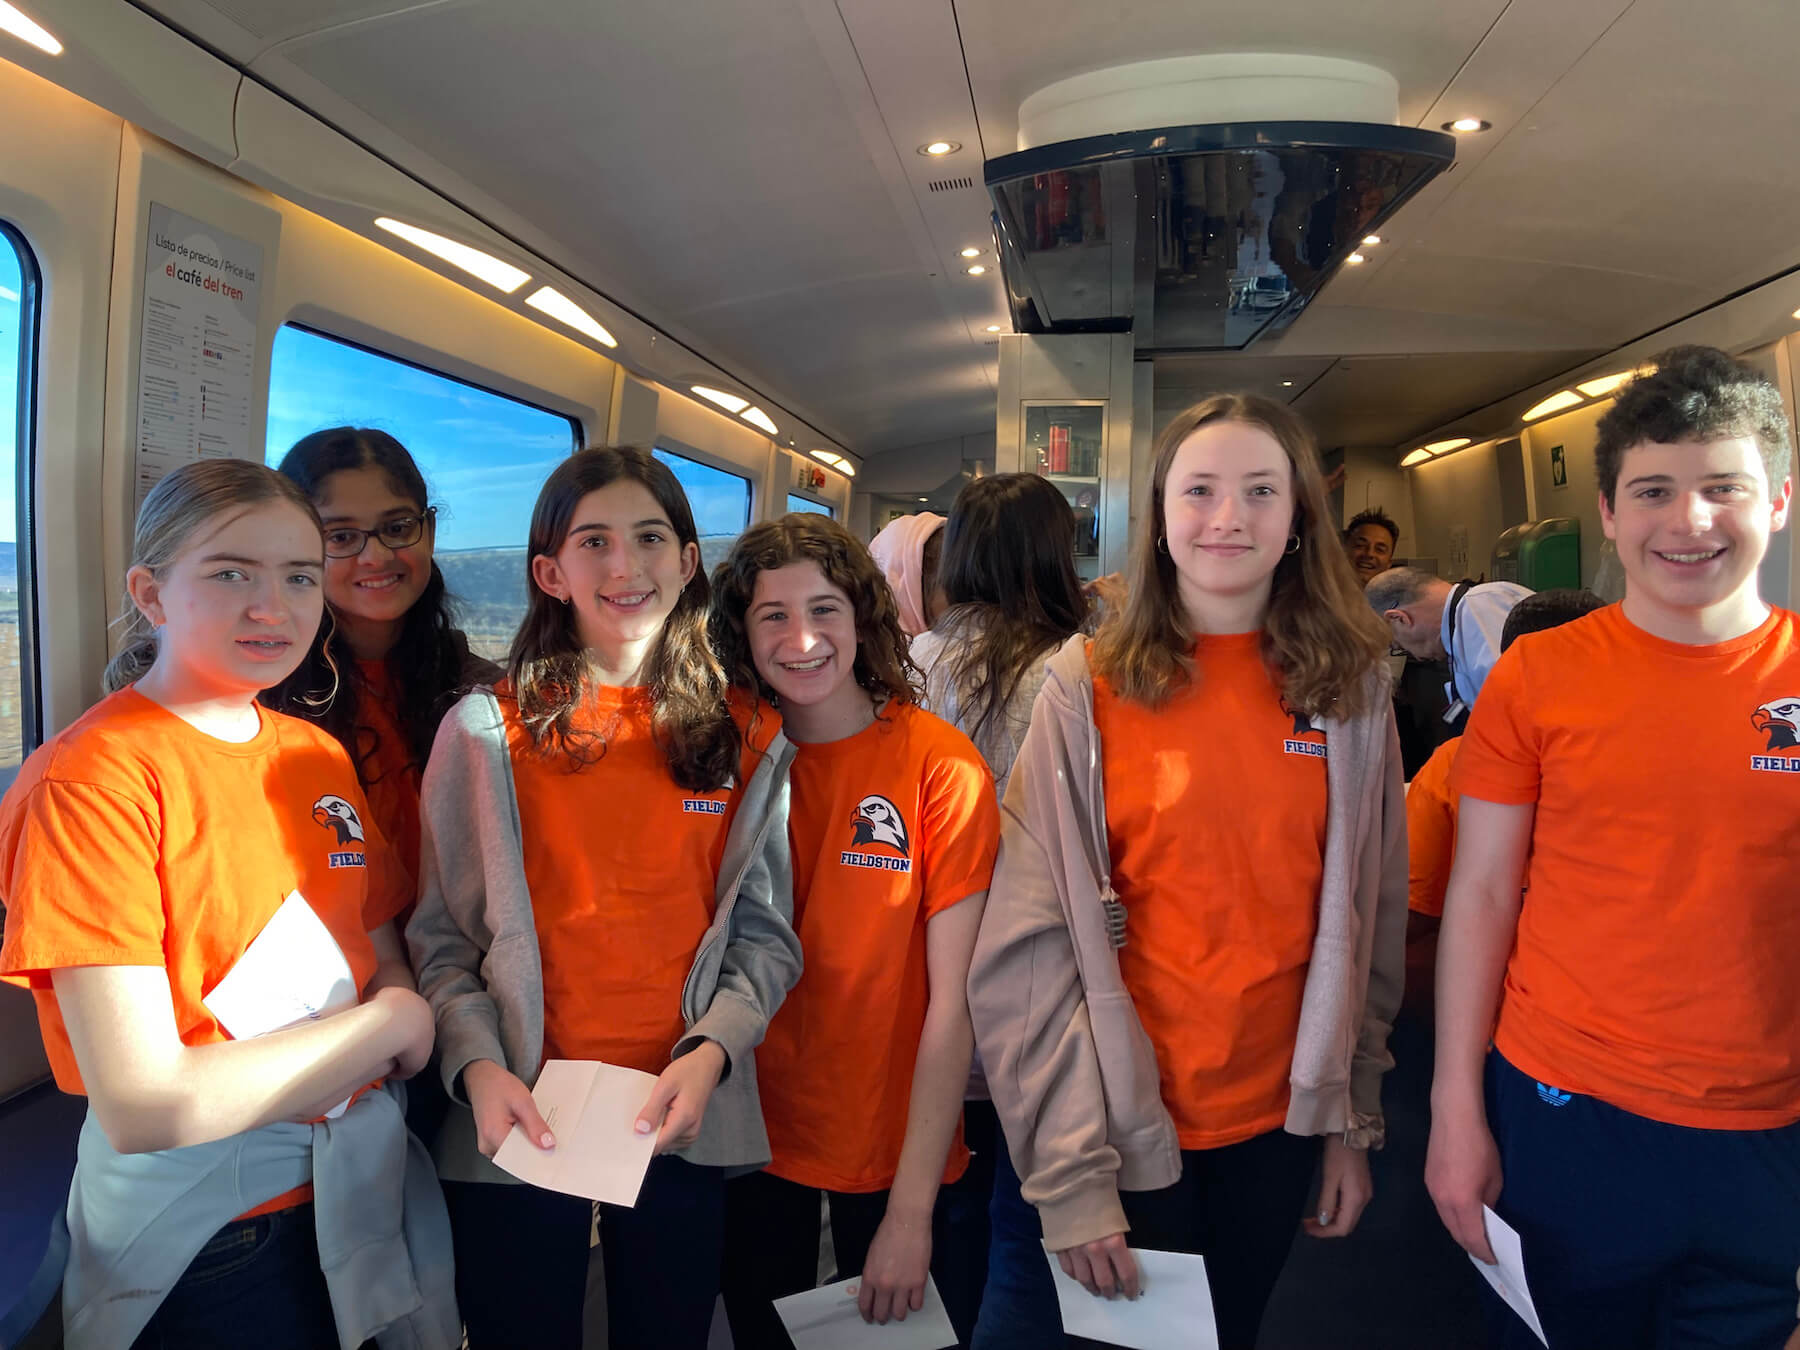 Group of Ethical Culture Fieldston School Middle School students on a train traveling during trip abroad to Spain